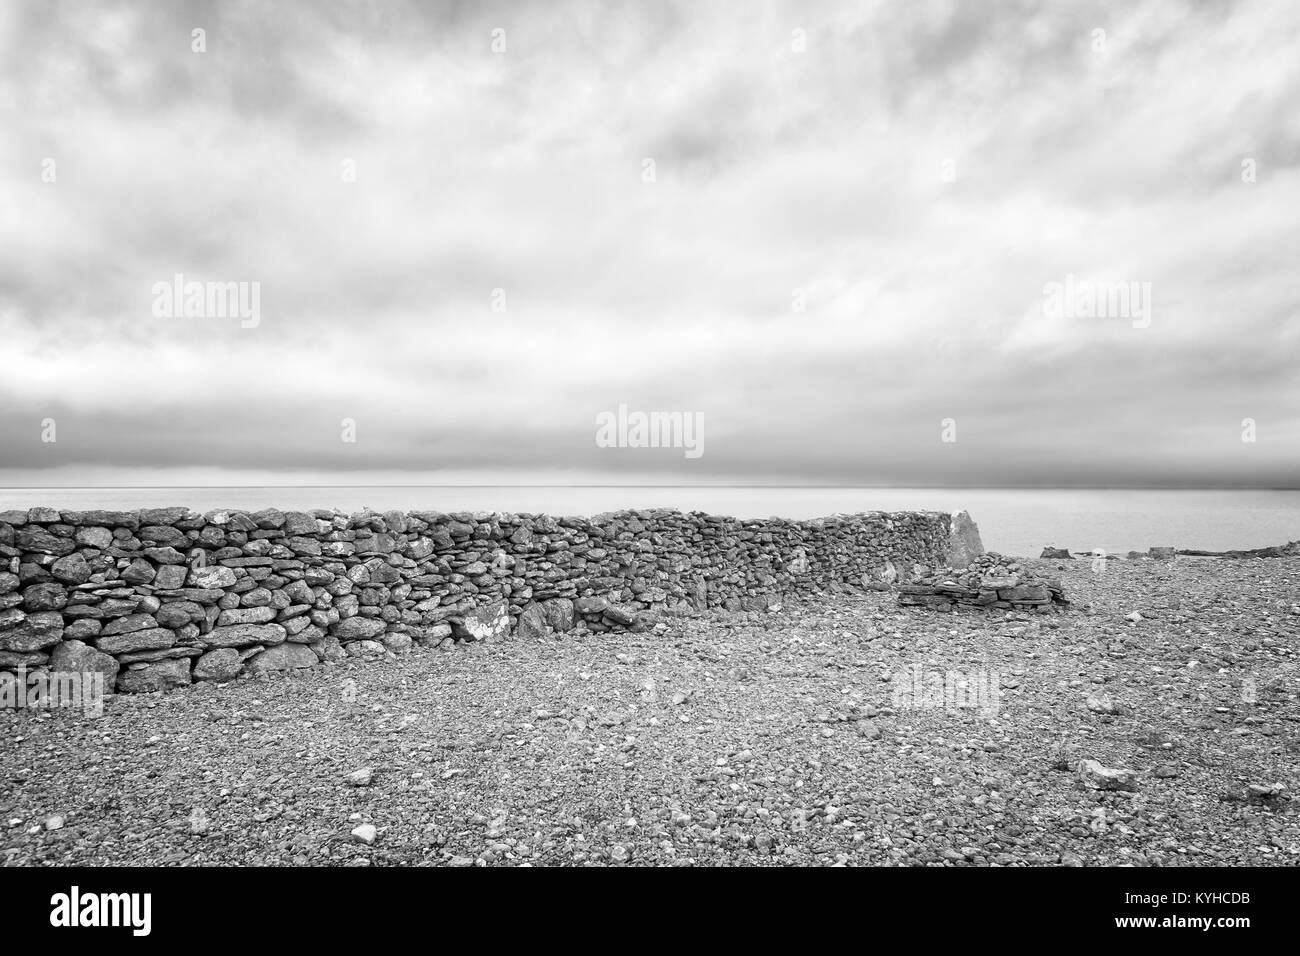 Old stone wall on a rocky beach runs perpendicular to the edge of the sea. Moody mysterious scene. Heavy clouds. Black and white. Faro, Sweden Stock Photo